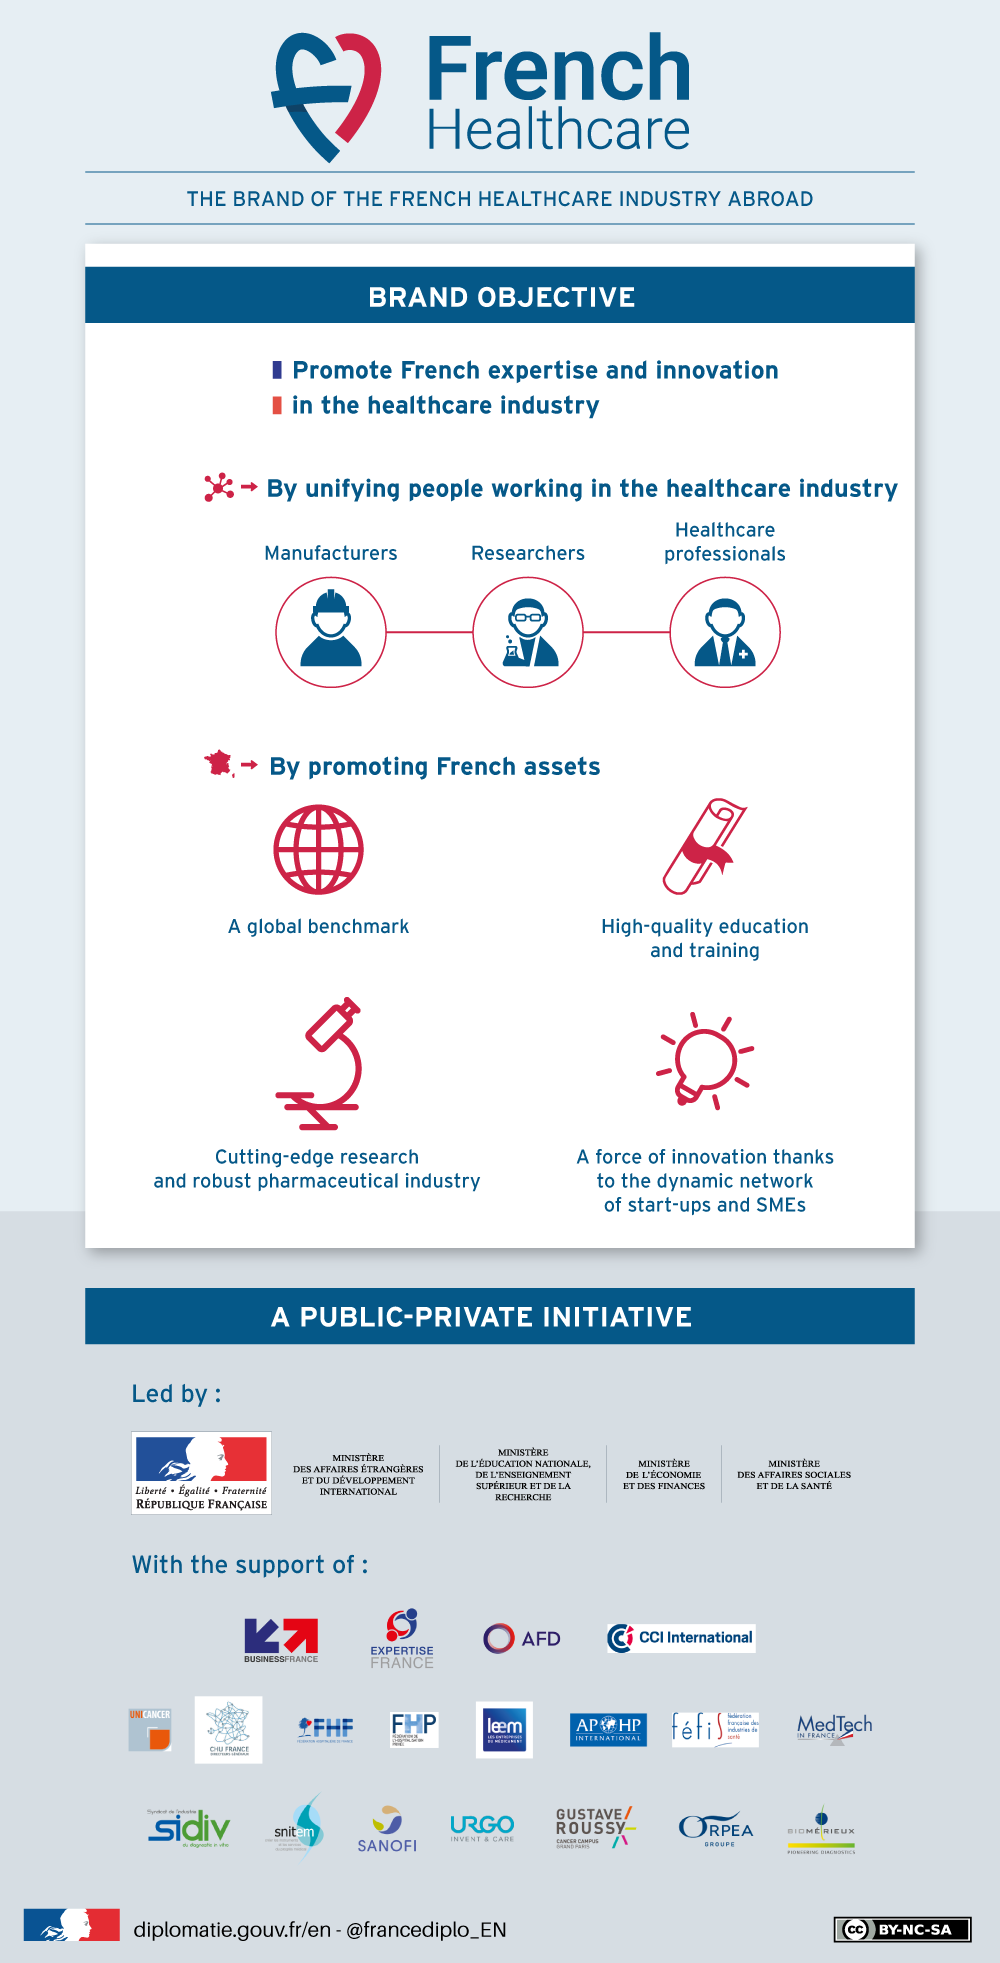 French healthcare: A brand of healthcare providers abroad - Ministry for  Europe and Foreign Affairs